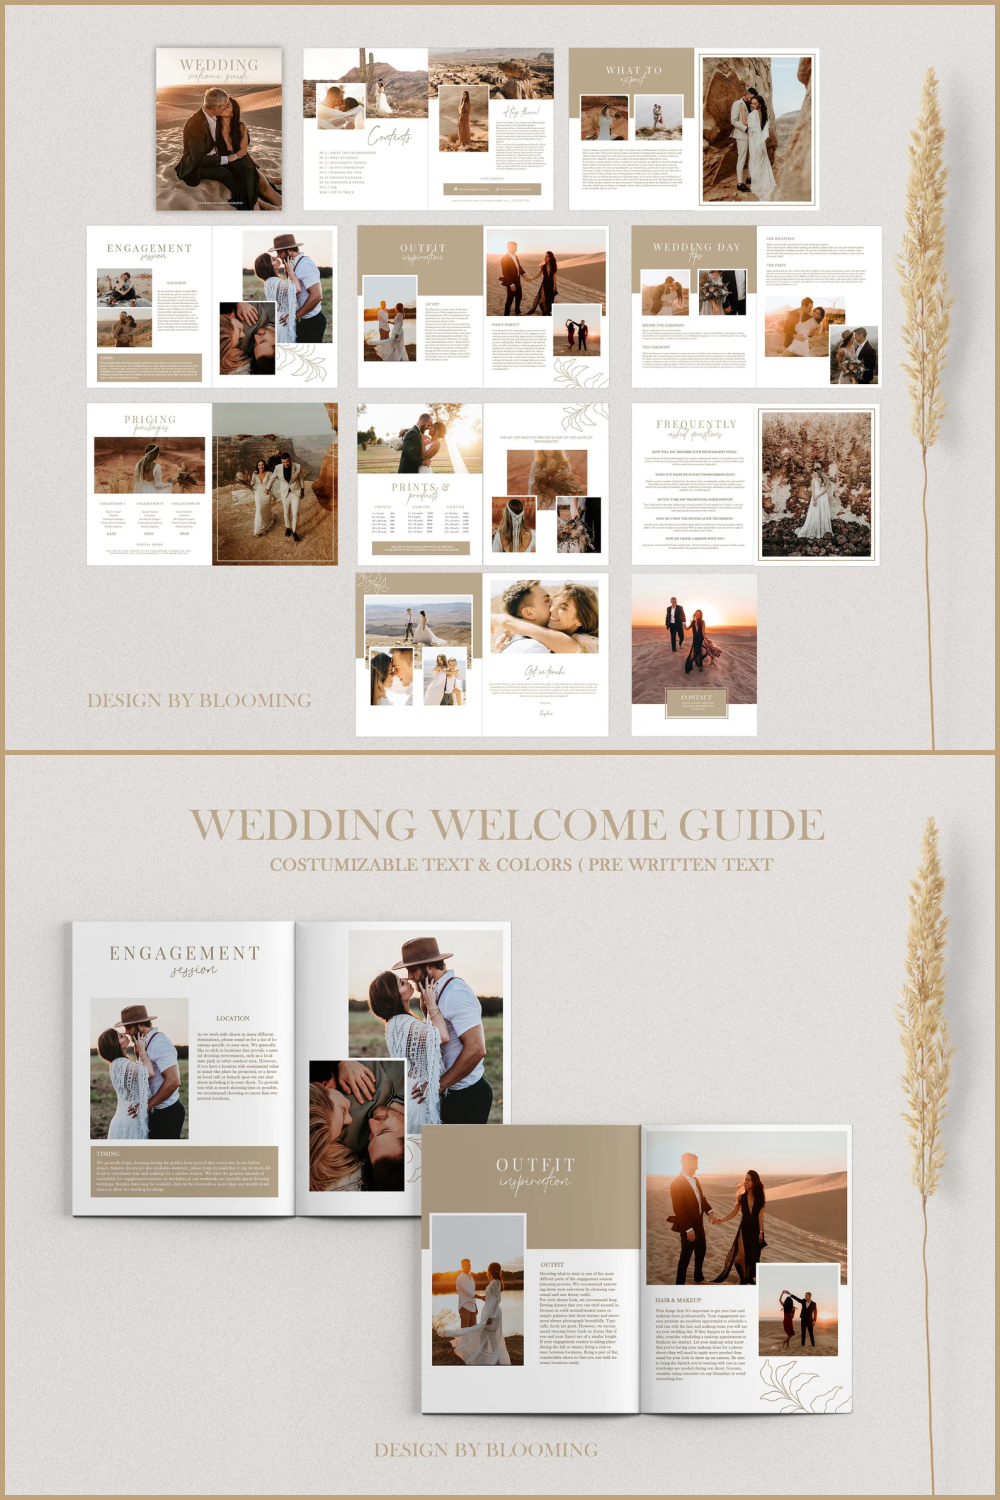 Wedding welcome guide of pinterest.